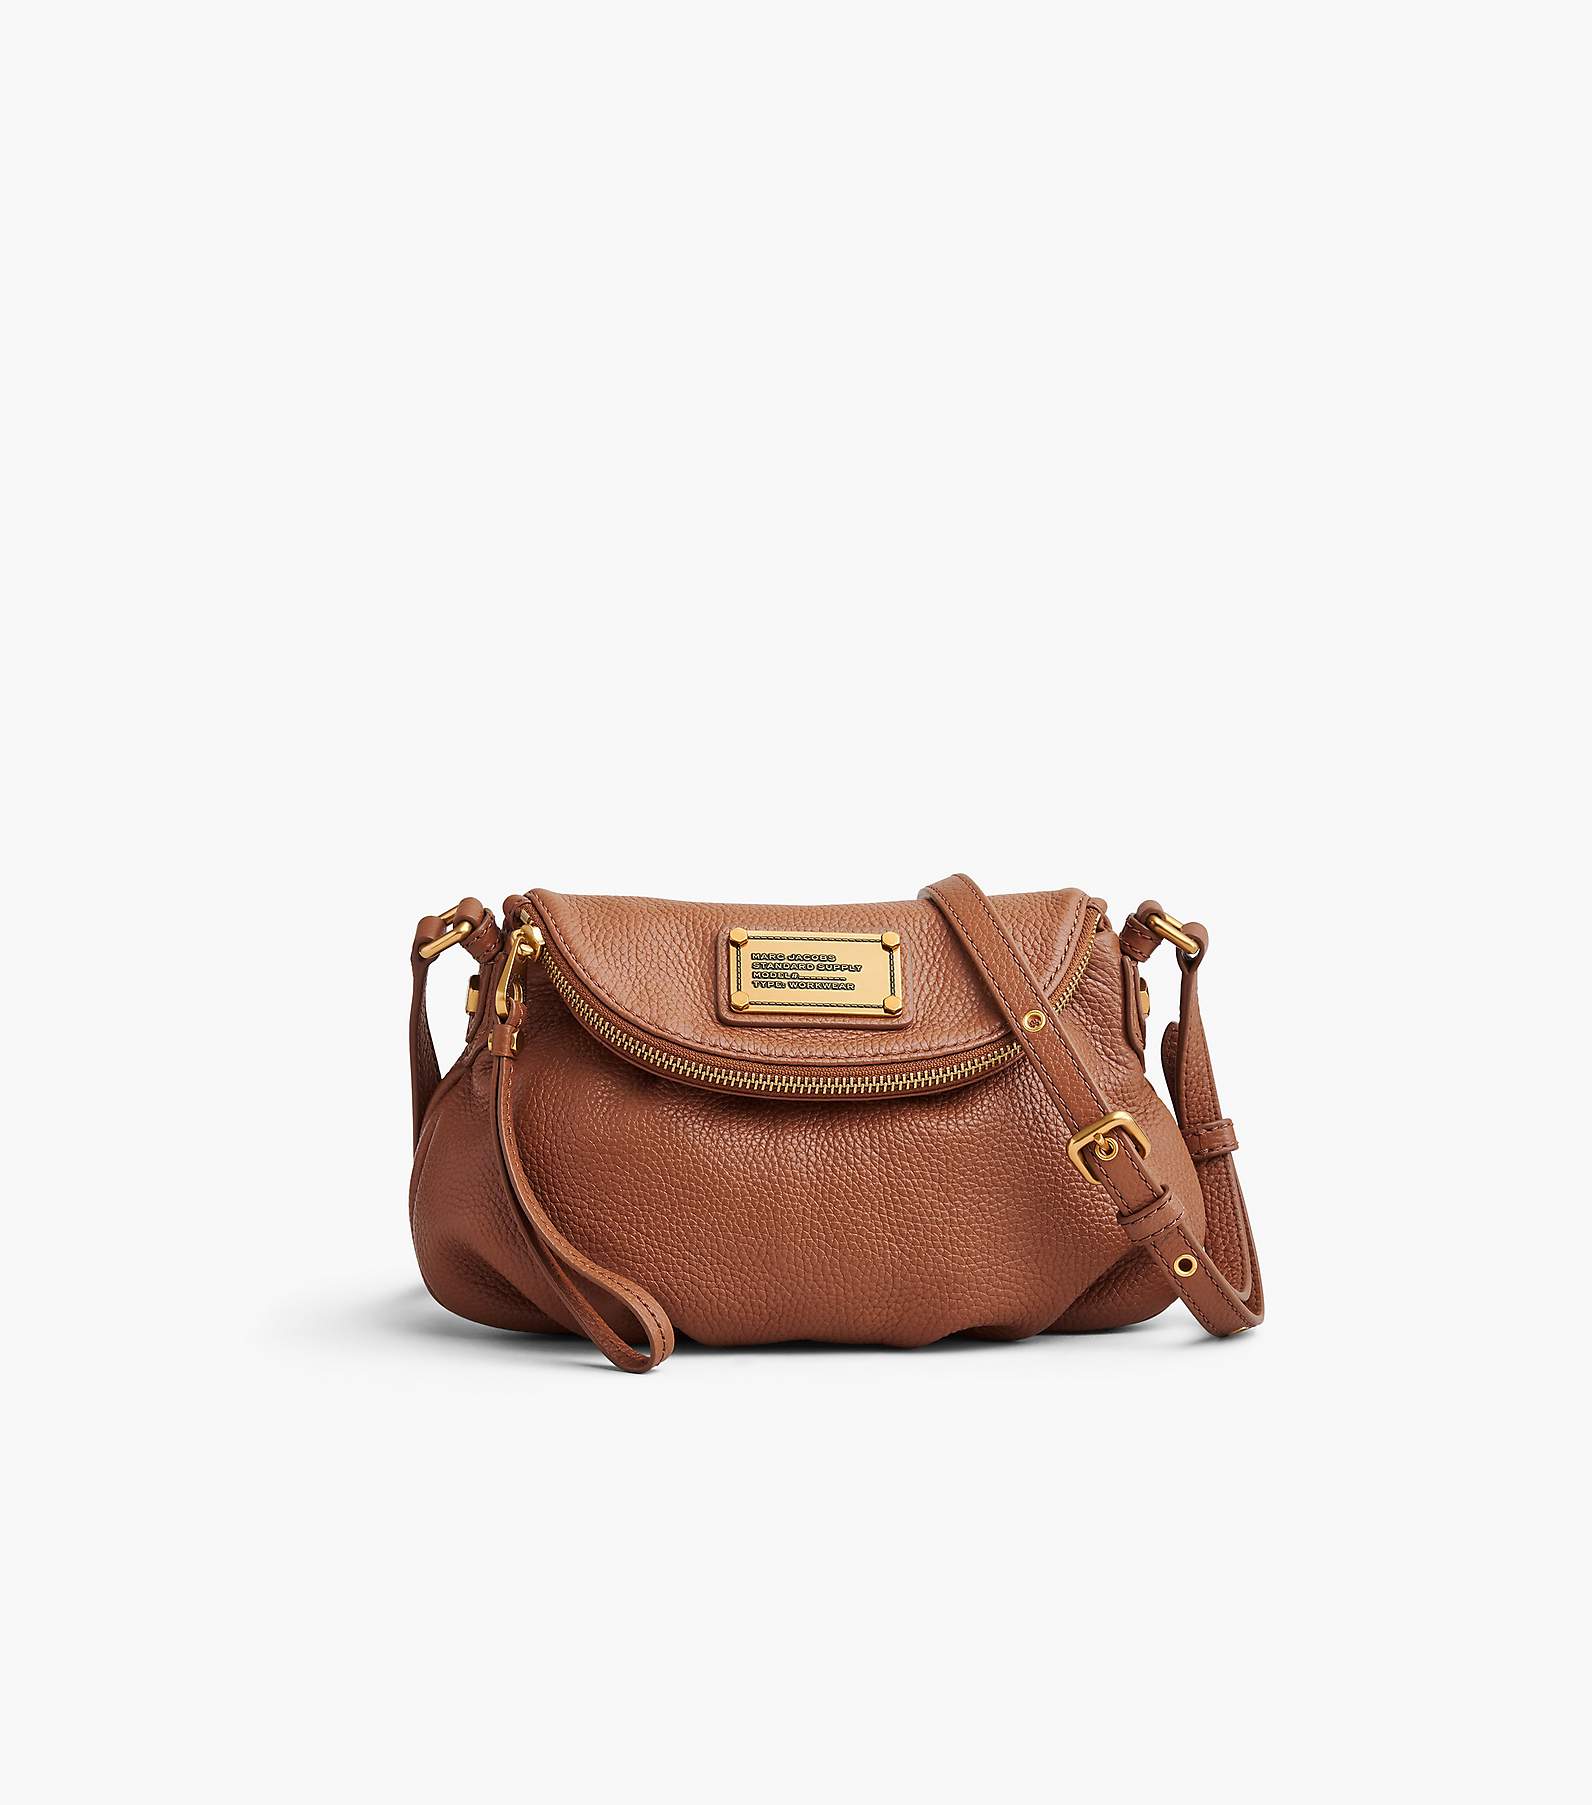 THE ICONIC - THE MARC JACOBS Snapshot DTM Cross Body Bag > https